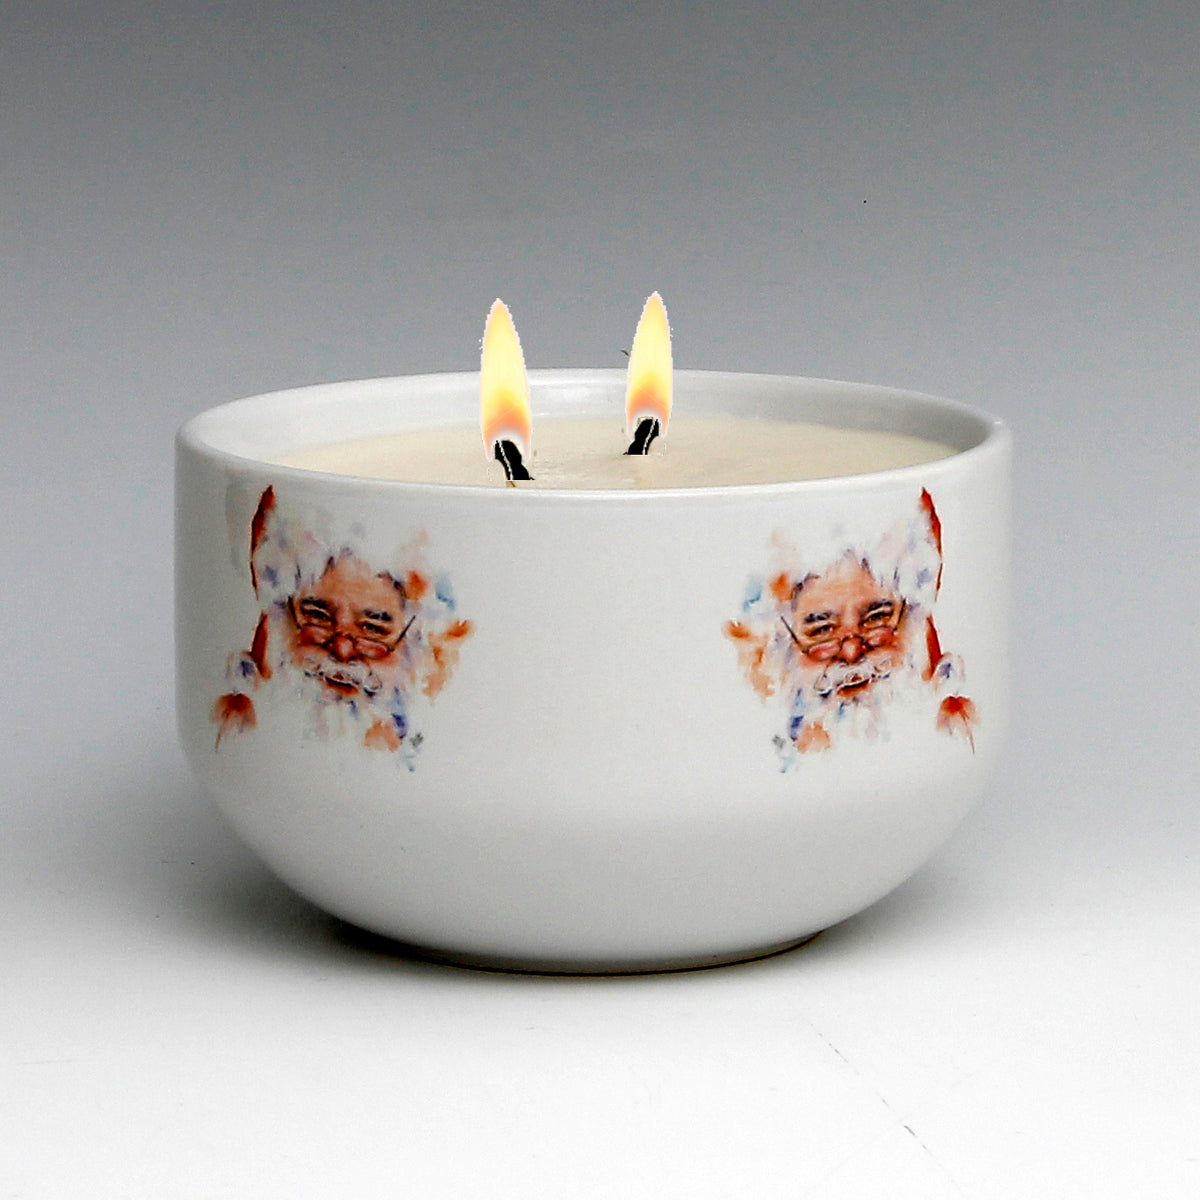 SUBLIMART: Two Wicks Soy Wax Candle in a Porcelain Bowl - Santa Claus (Design #XMS05)